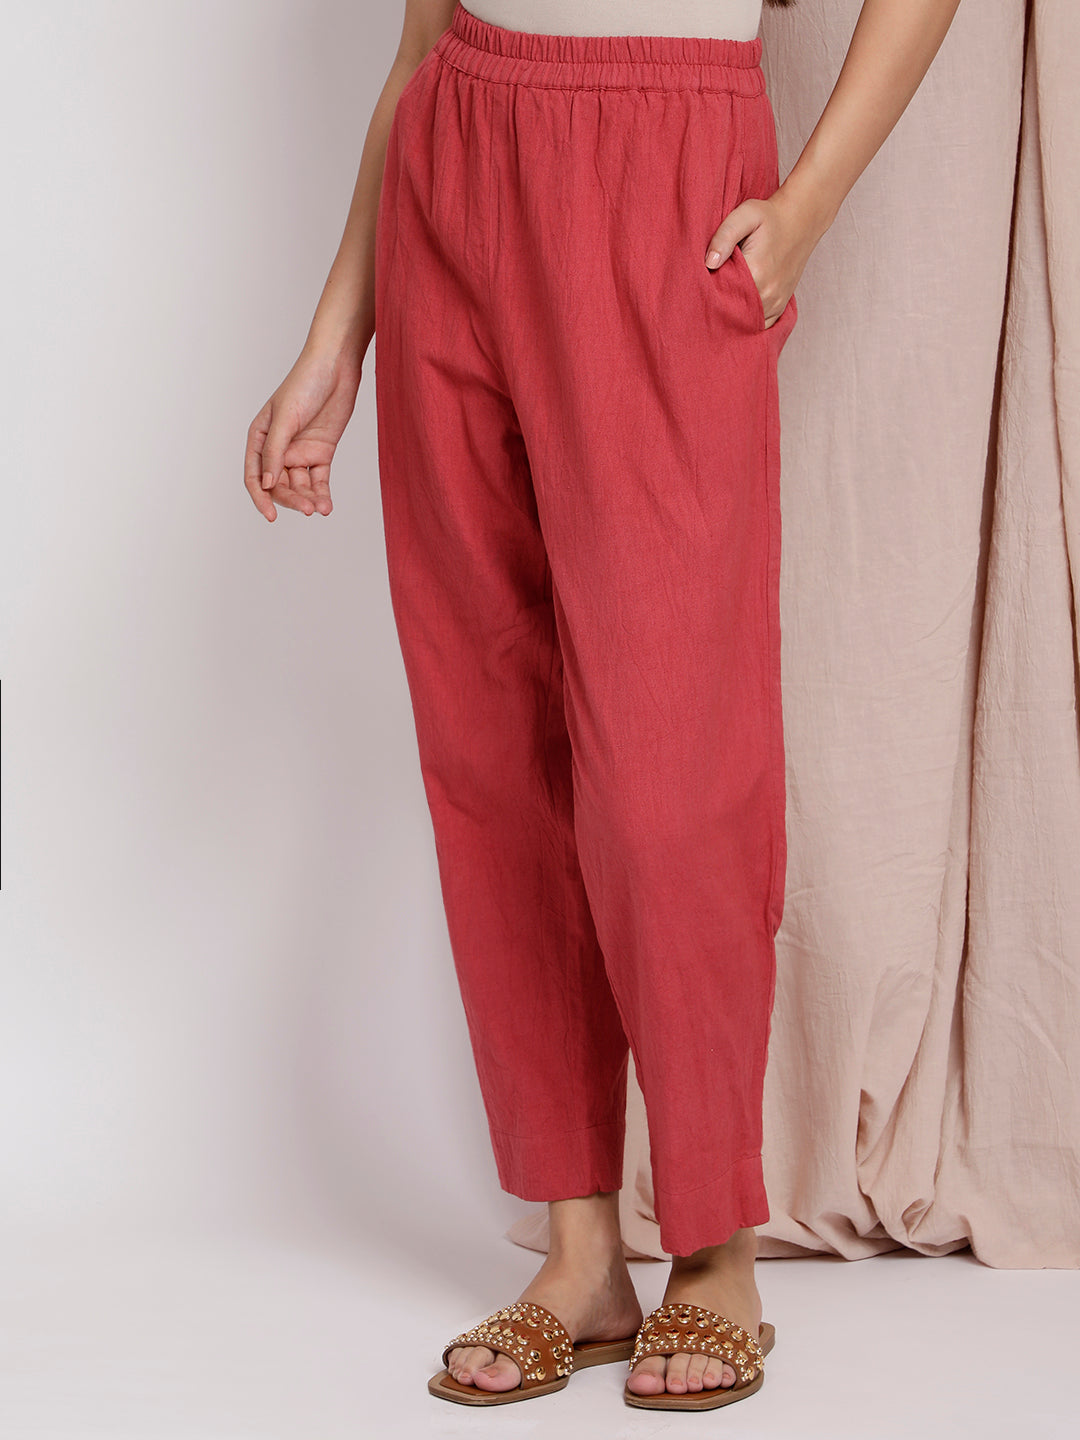 RUSTY RED COTTON LINEN EMBROIDERED  KURTA WITH PANTS